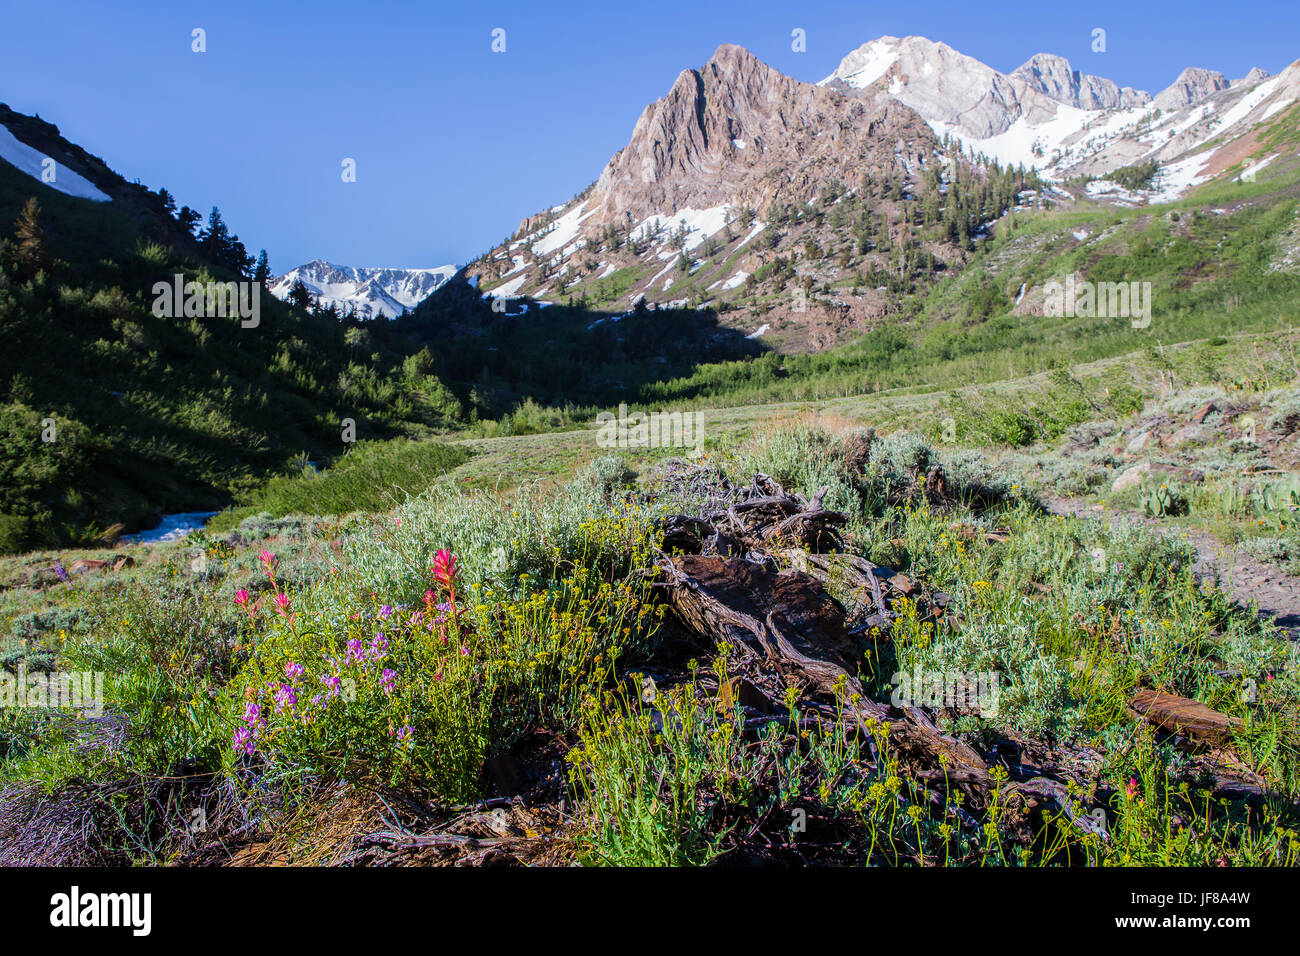 Wildflowers and sunny vivid colors during spring 2017 on the trail up through McGee creek canyon  in the eastern Sierra Nevada mountains California Stock Photo